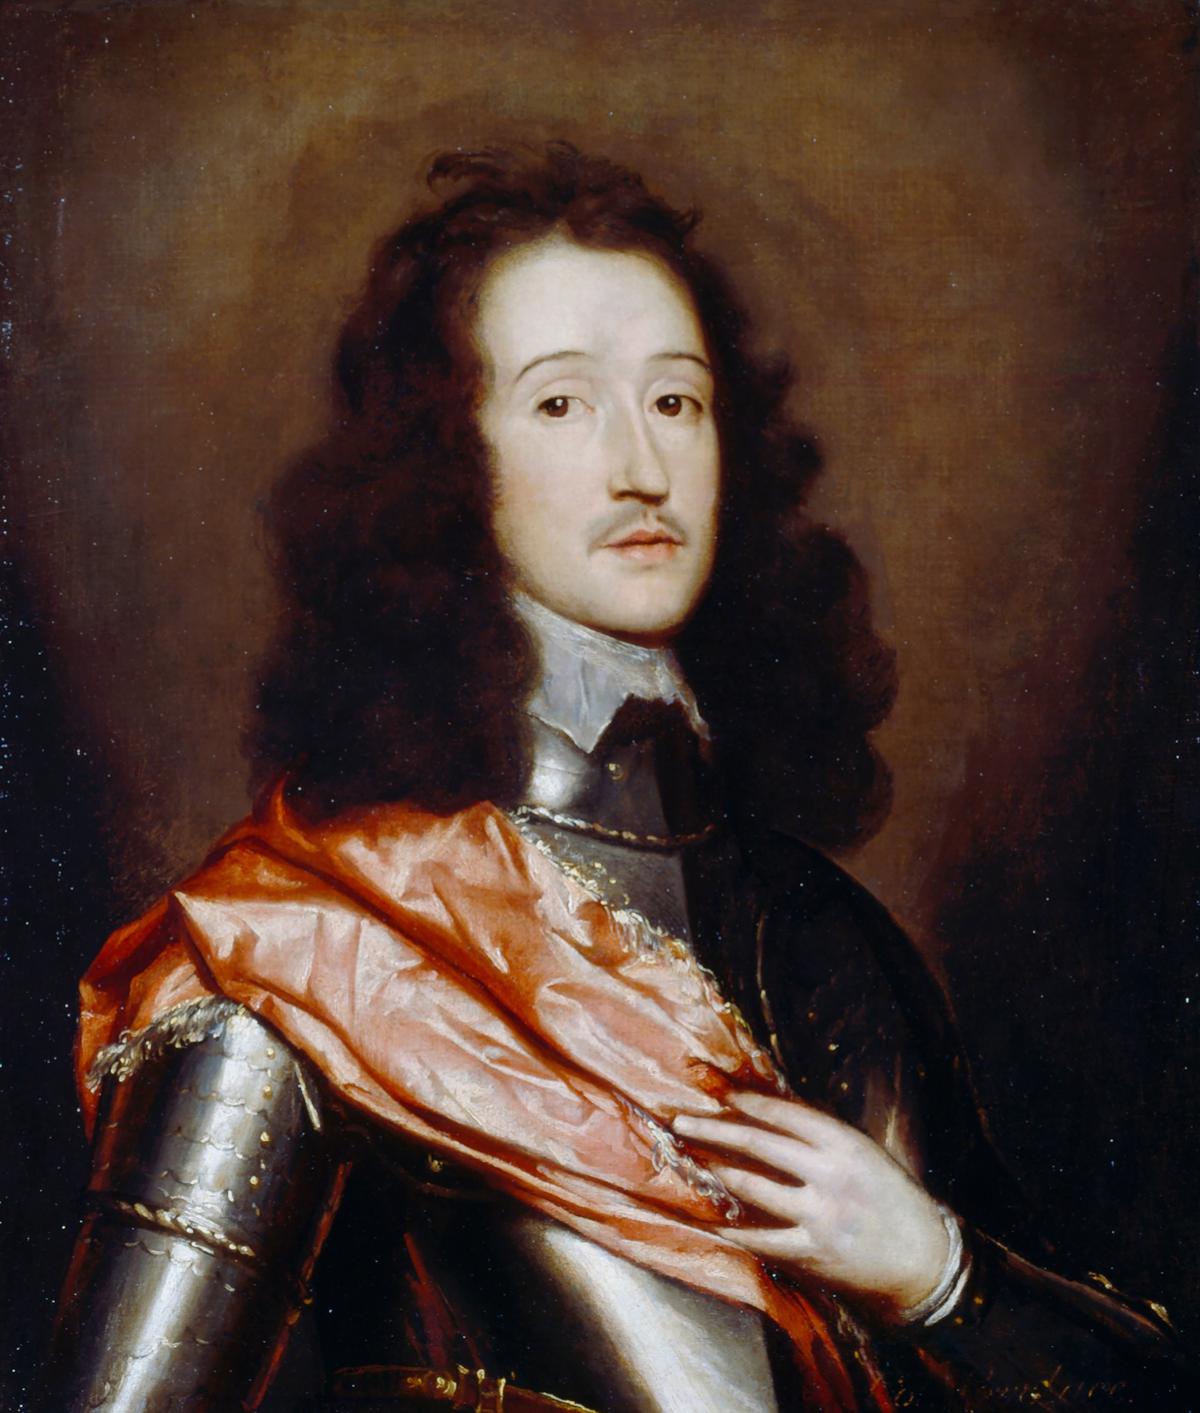 A portrait of Richard Lovelace, circa 1645, by William Dobson. Oil on canvas. Dulwich Picture Gallery, London. (Public Domain)